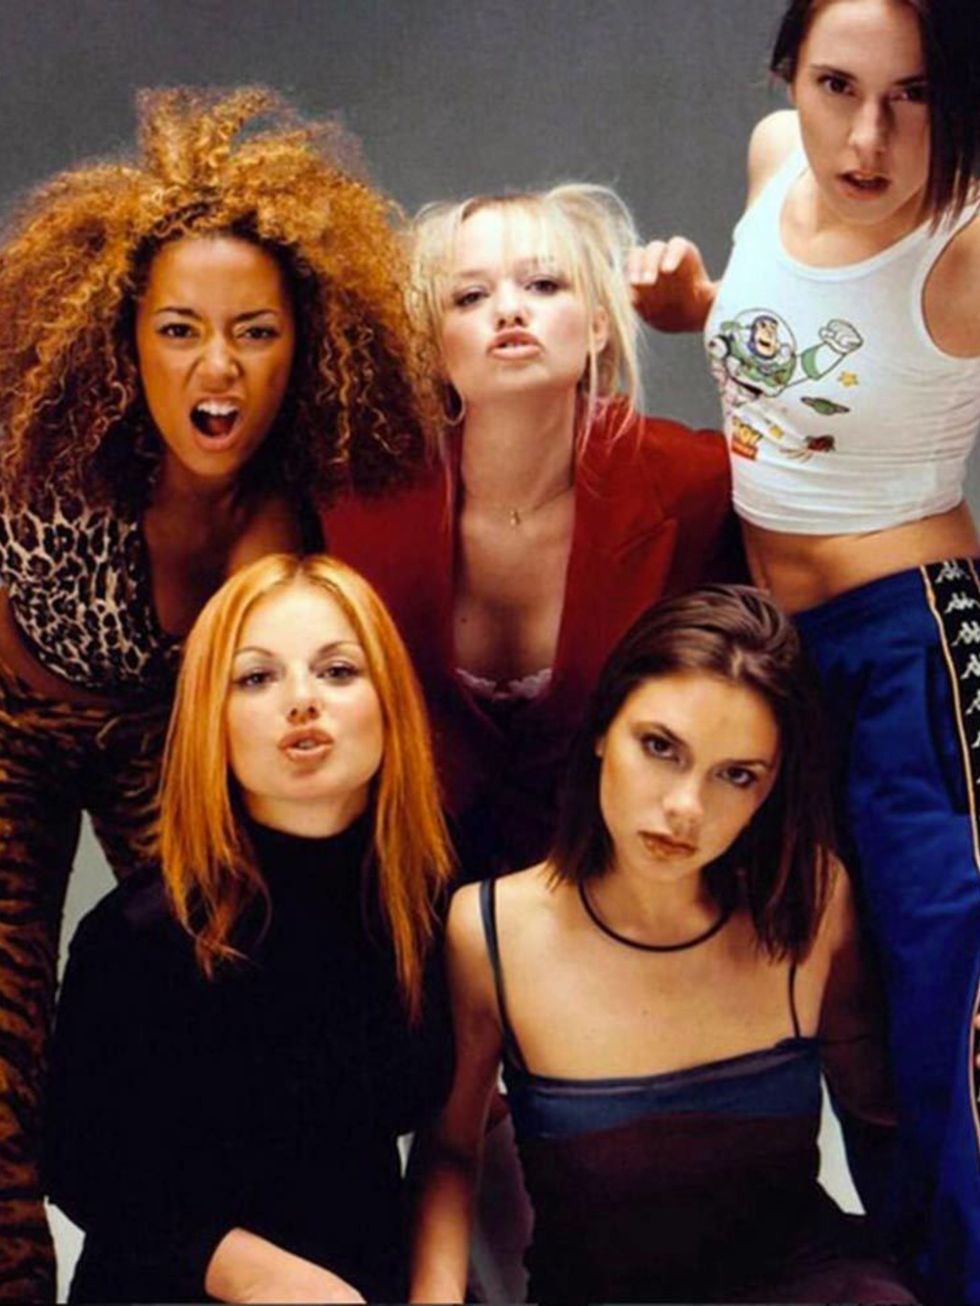 Cara Delevingne
@caradelevingne
'Happy international women's day for yesterday! Which spice girl are you? #girlpower @officialmelb@therealgerihalliwell @emmaleebunton@victoriabeckham @melaniecmusic'